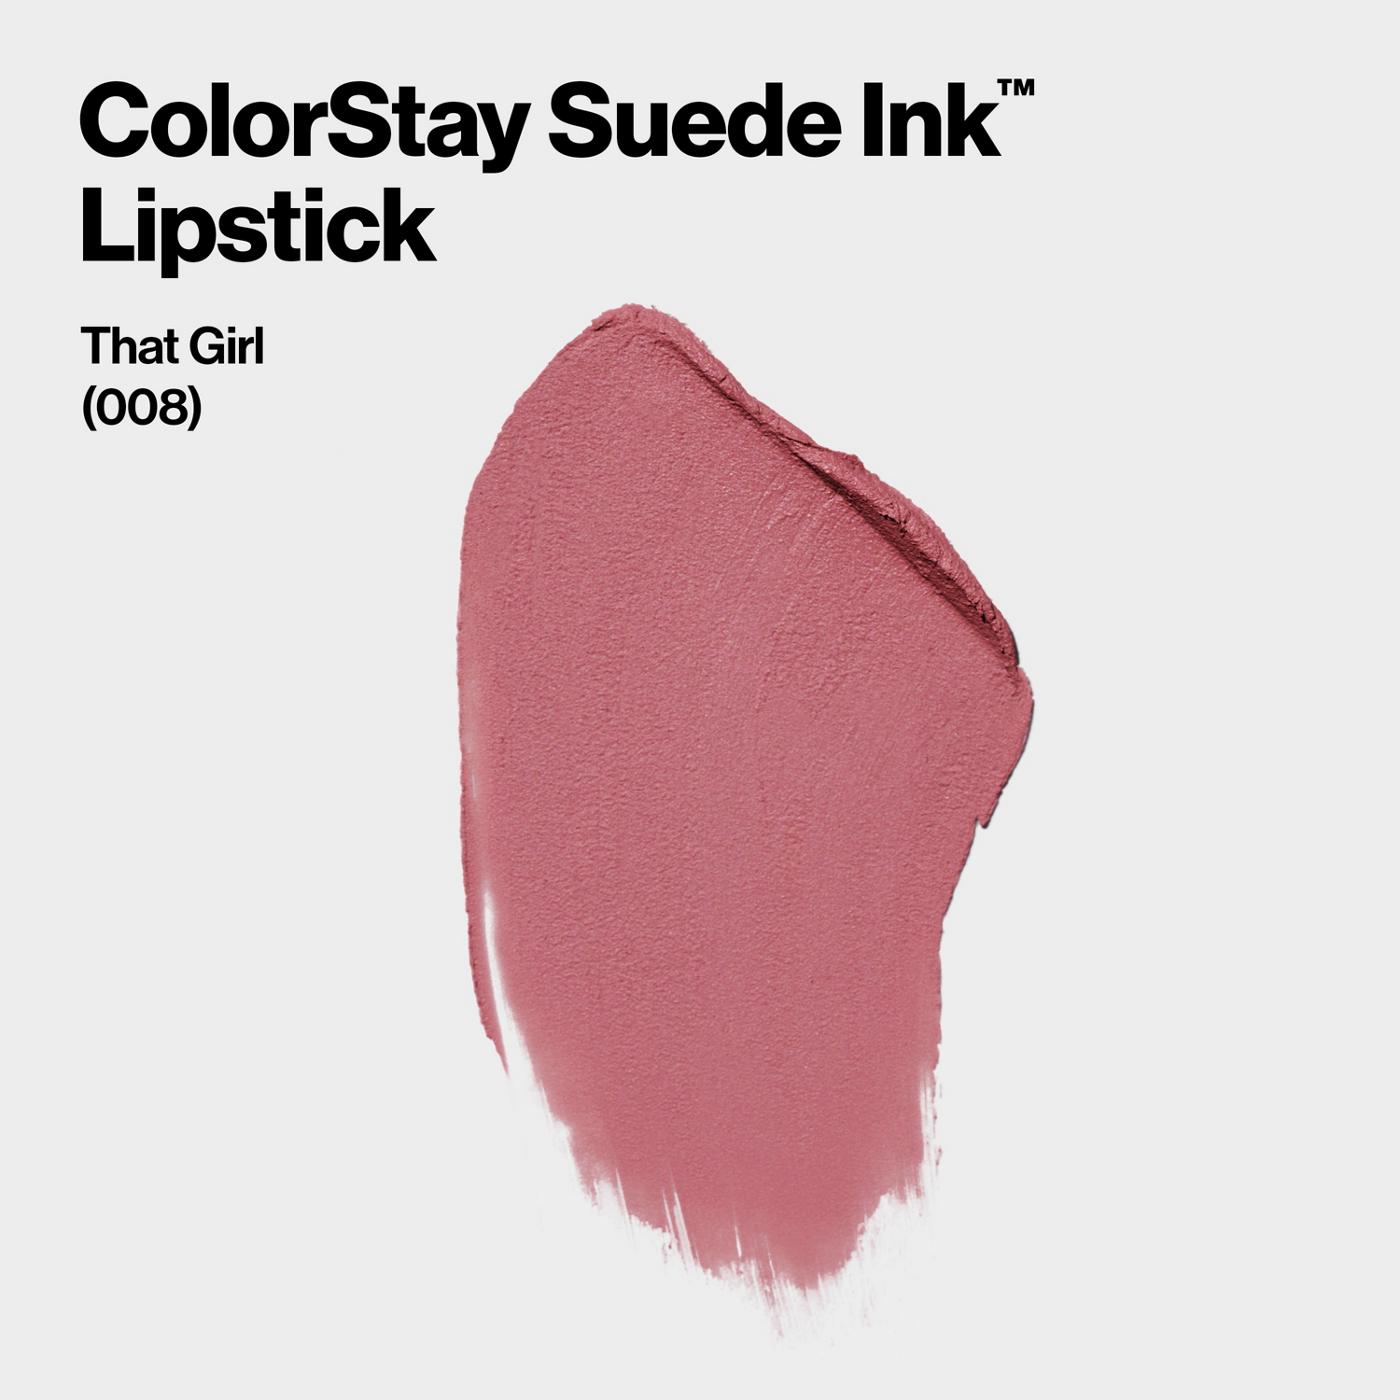 Revlon ColorStay Suede Ink Lipstick - That Girl; image 4 of 5